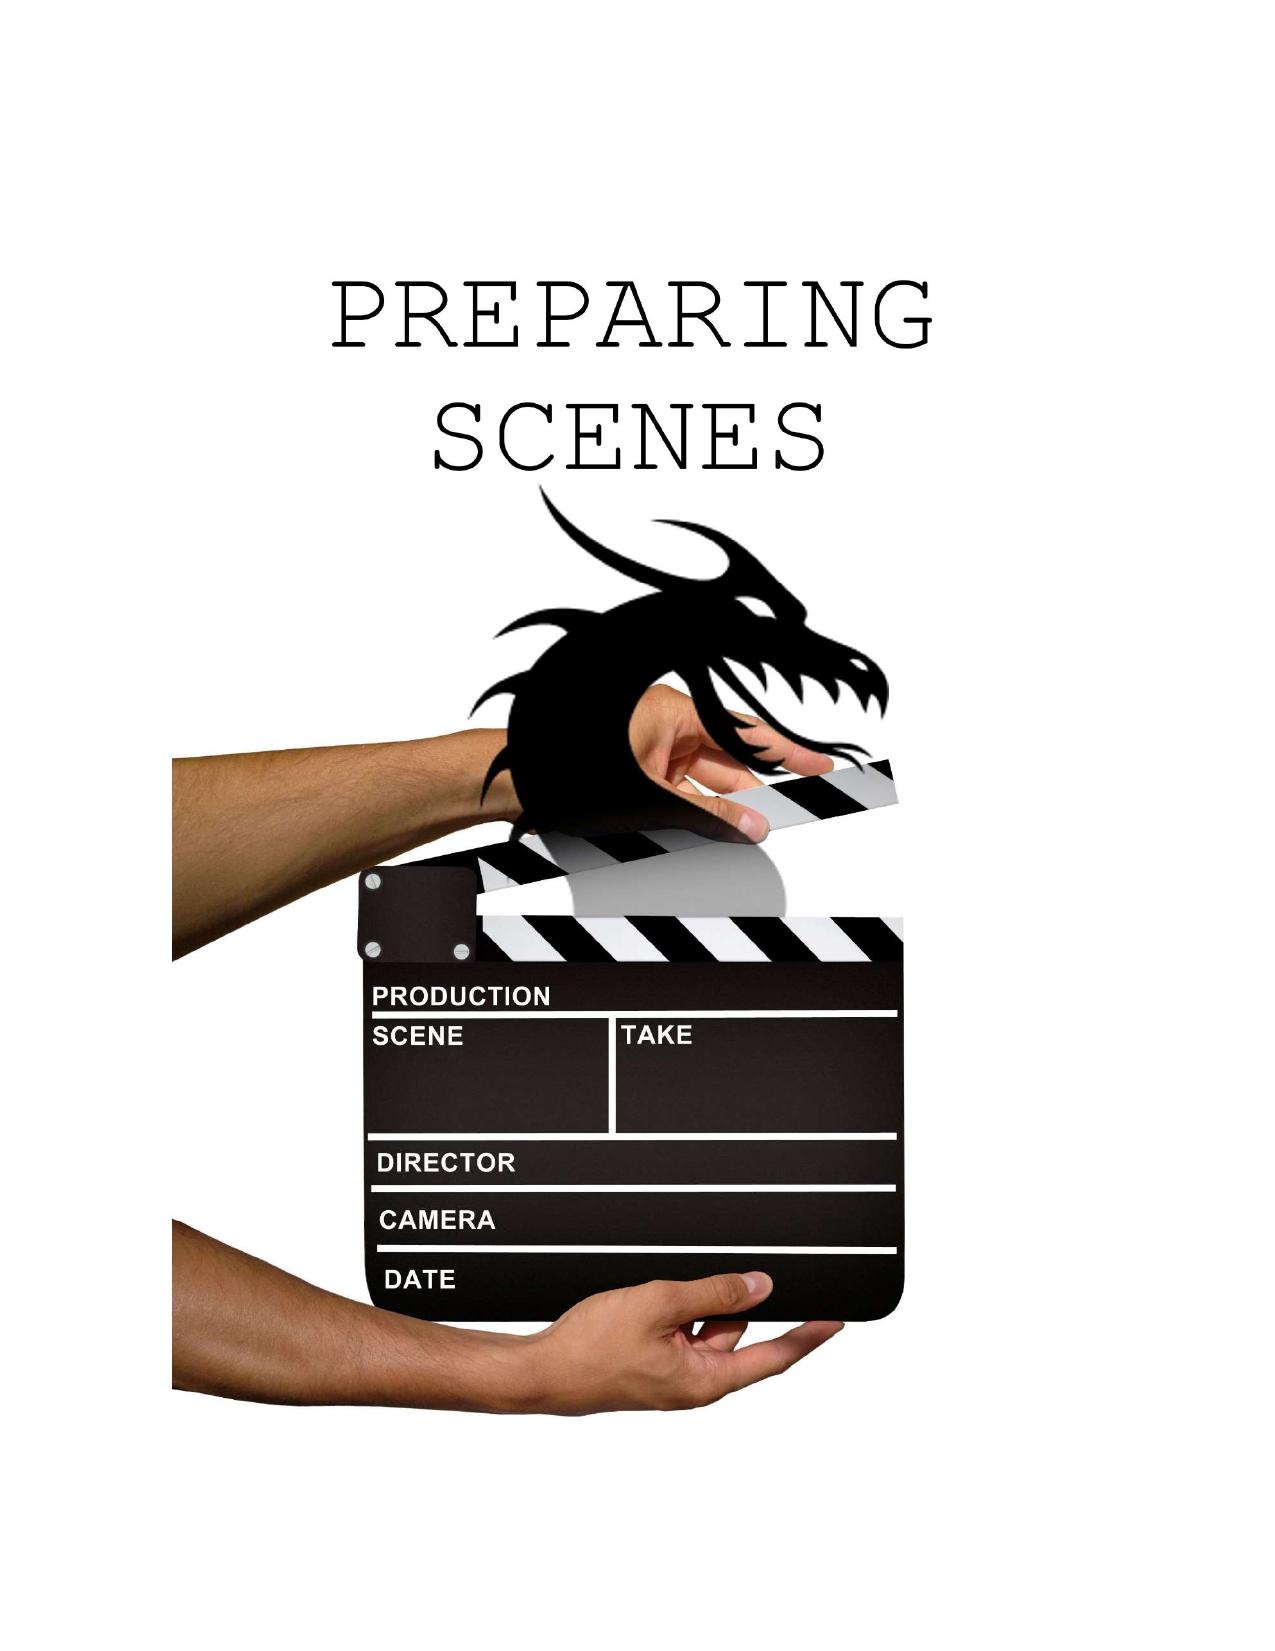 Think Different by Preparing Scenes